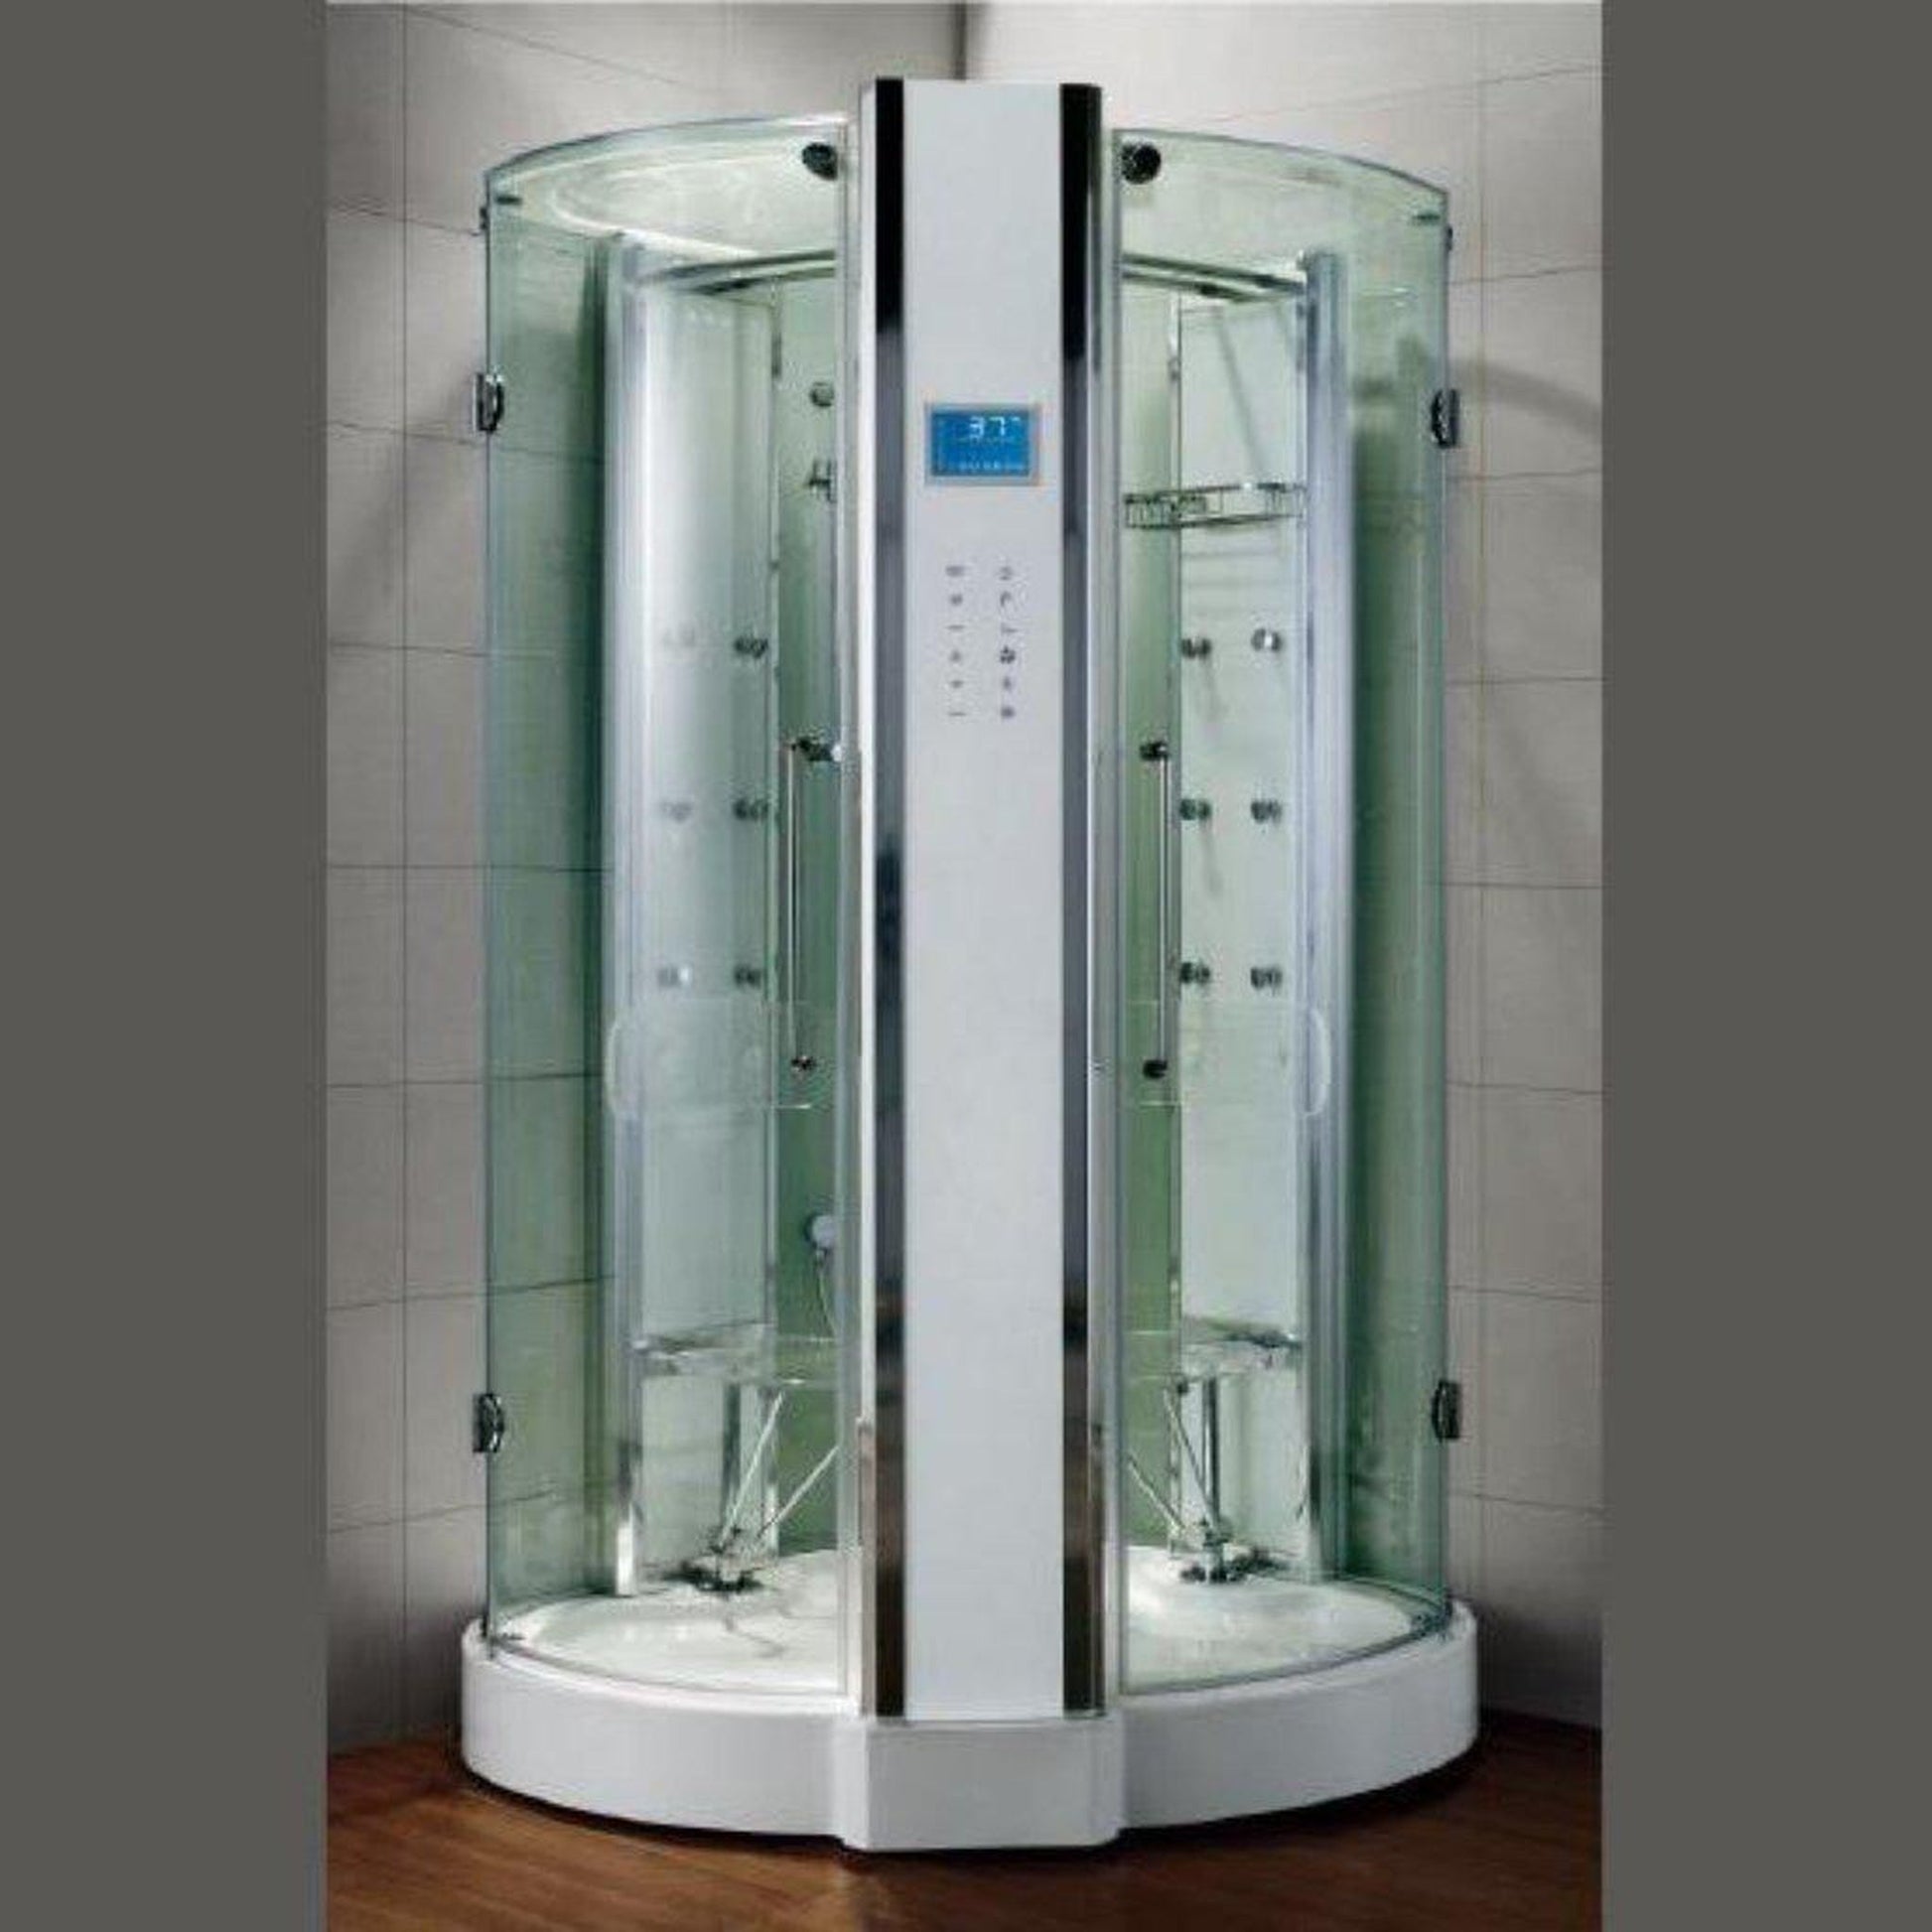 https://usbathstore.com/cdn/shop/products/Athena-53-x-53-x-90-Two-Person-Corner-Steam-Shower-With-Dual-Hinged-Doors-12-Massage-Jets-LED-Chromatherapy-Lighting.jpg?v=1678084414&width=1946